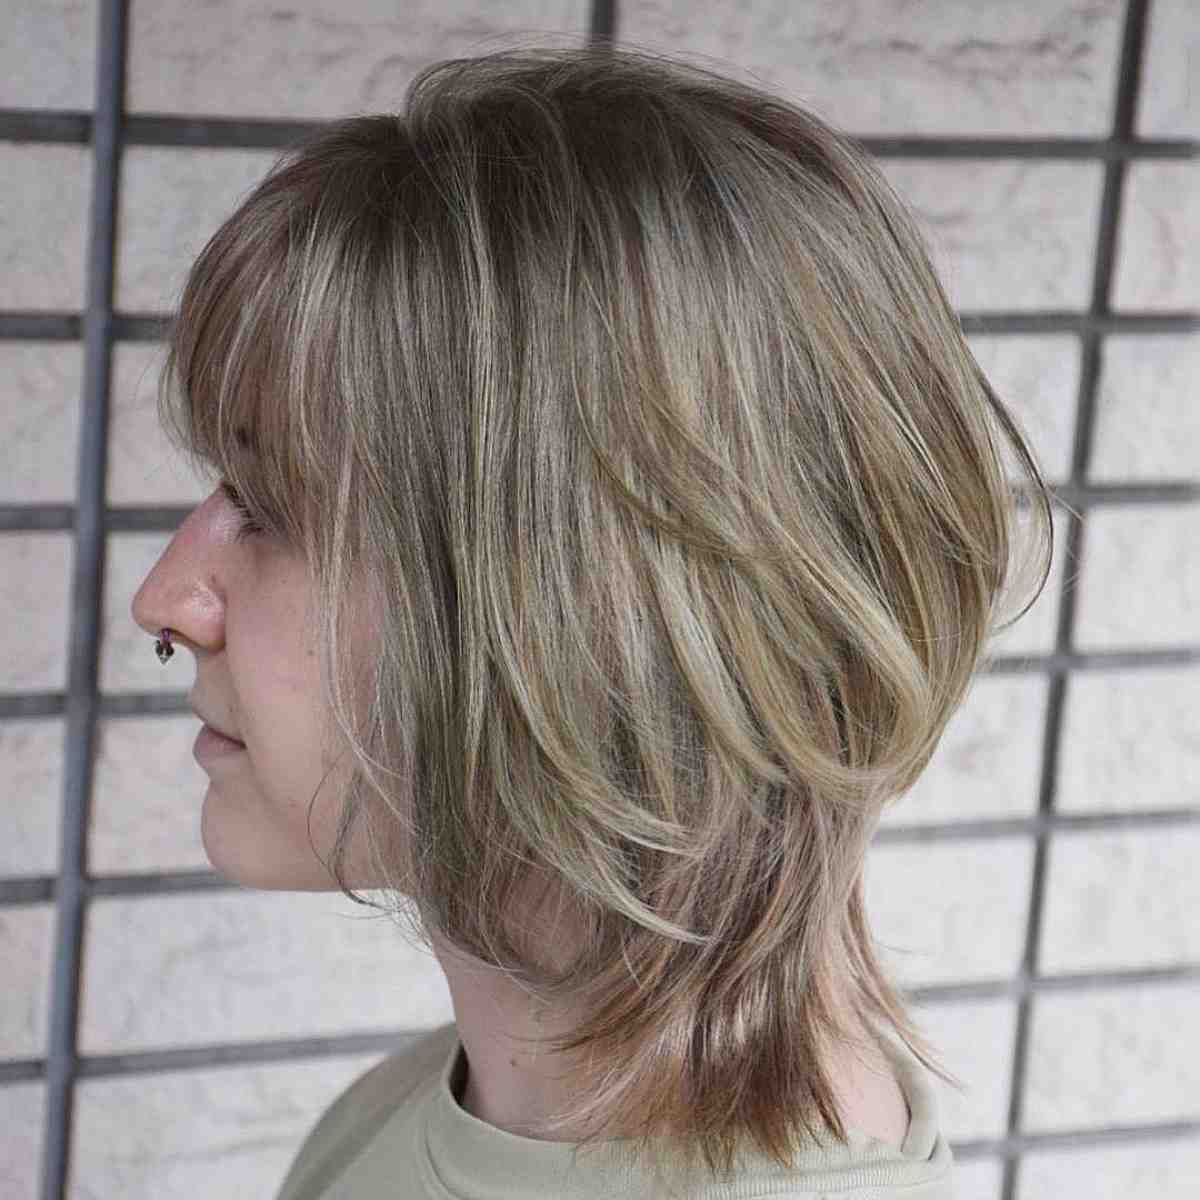 Short Wolf Cut with Wispy Layers and Bangs